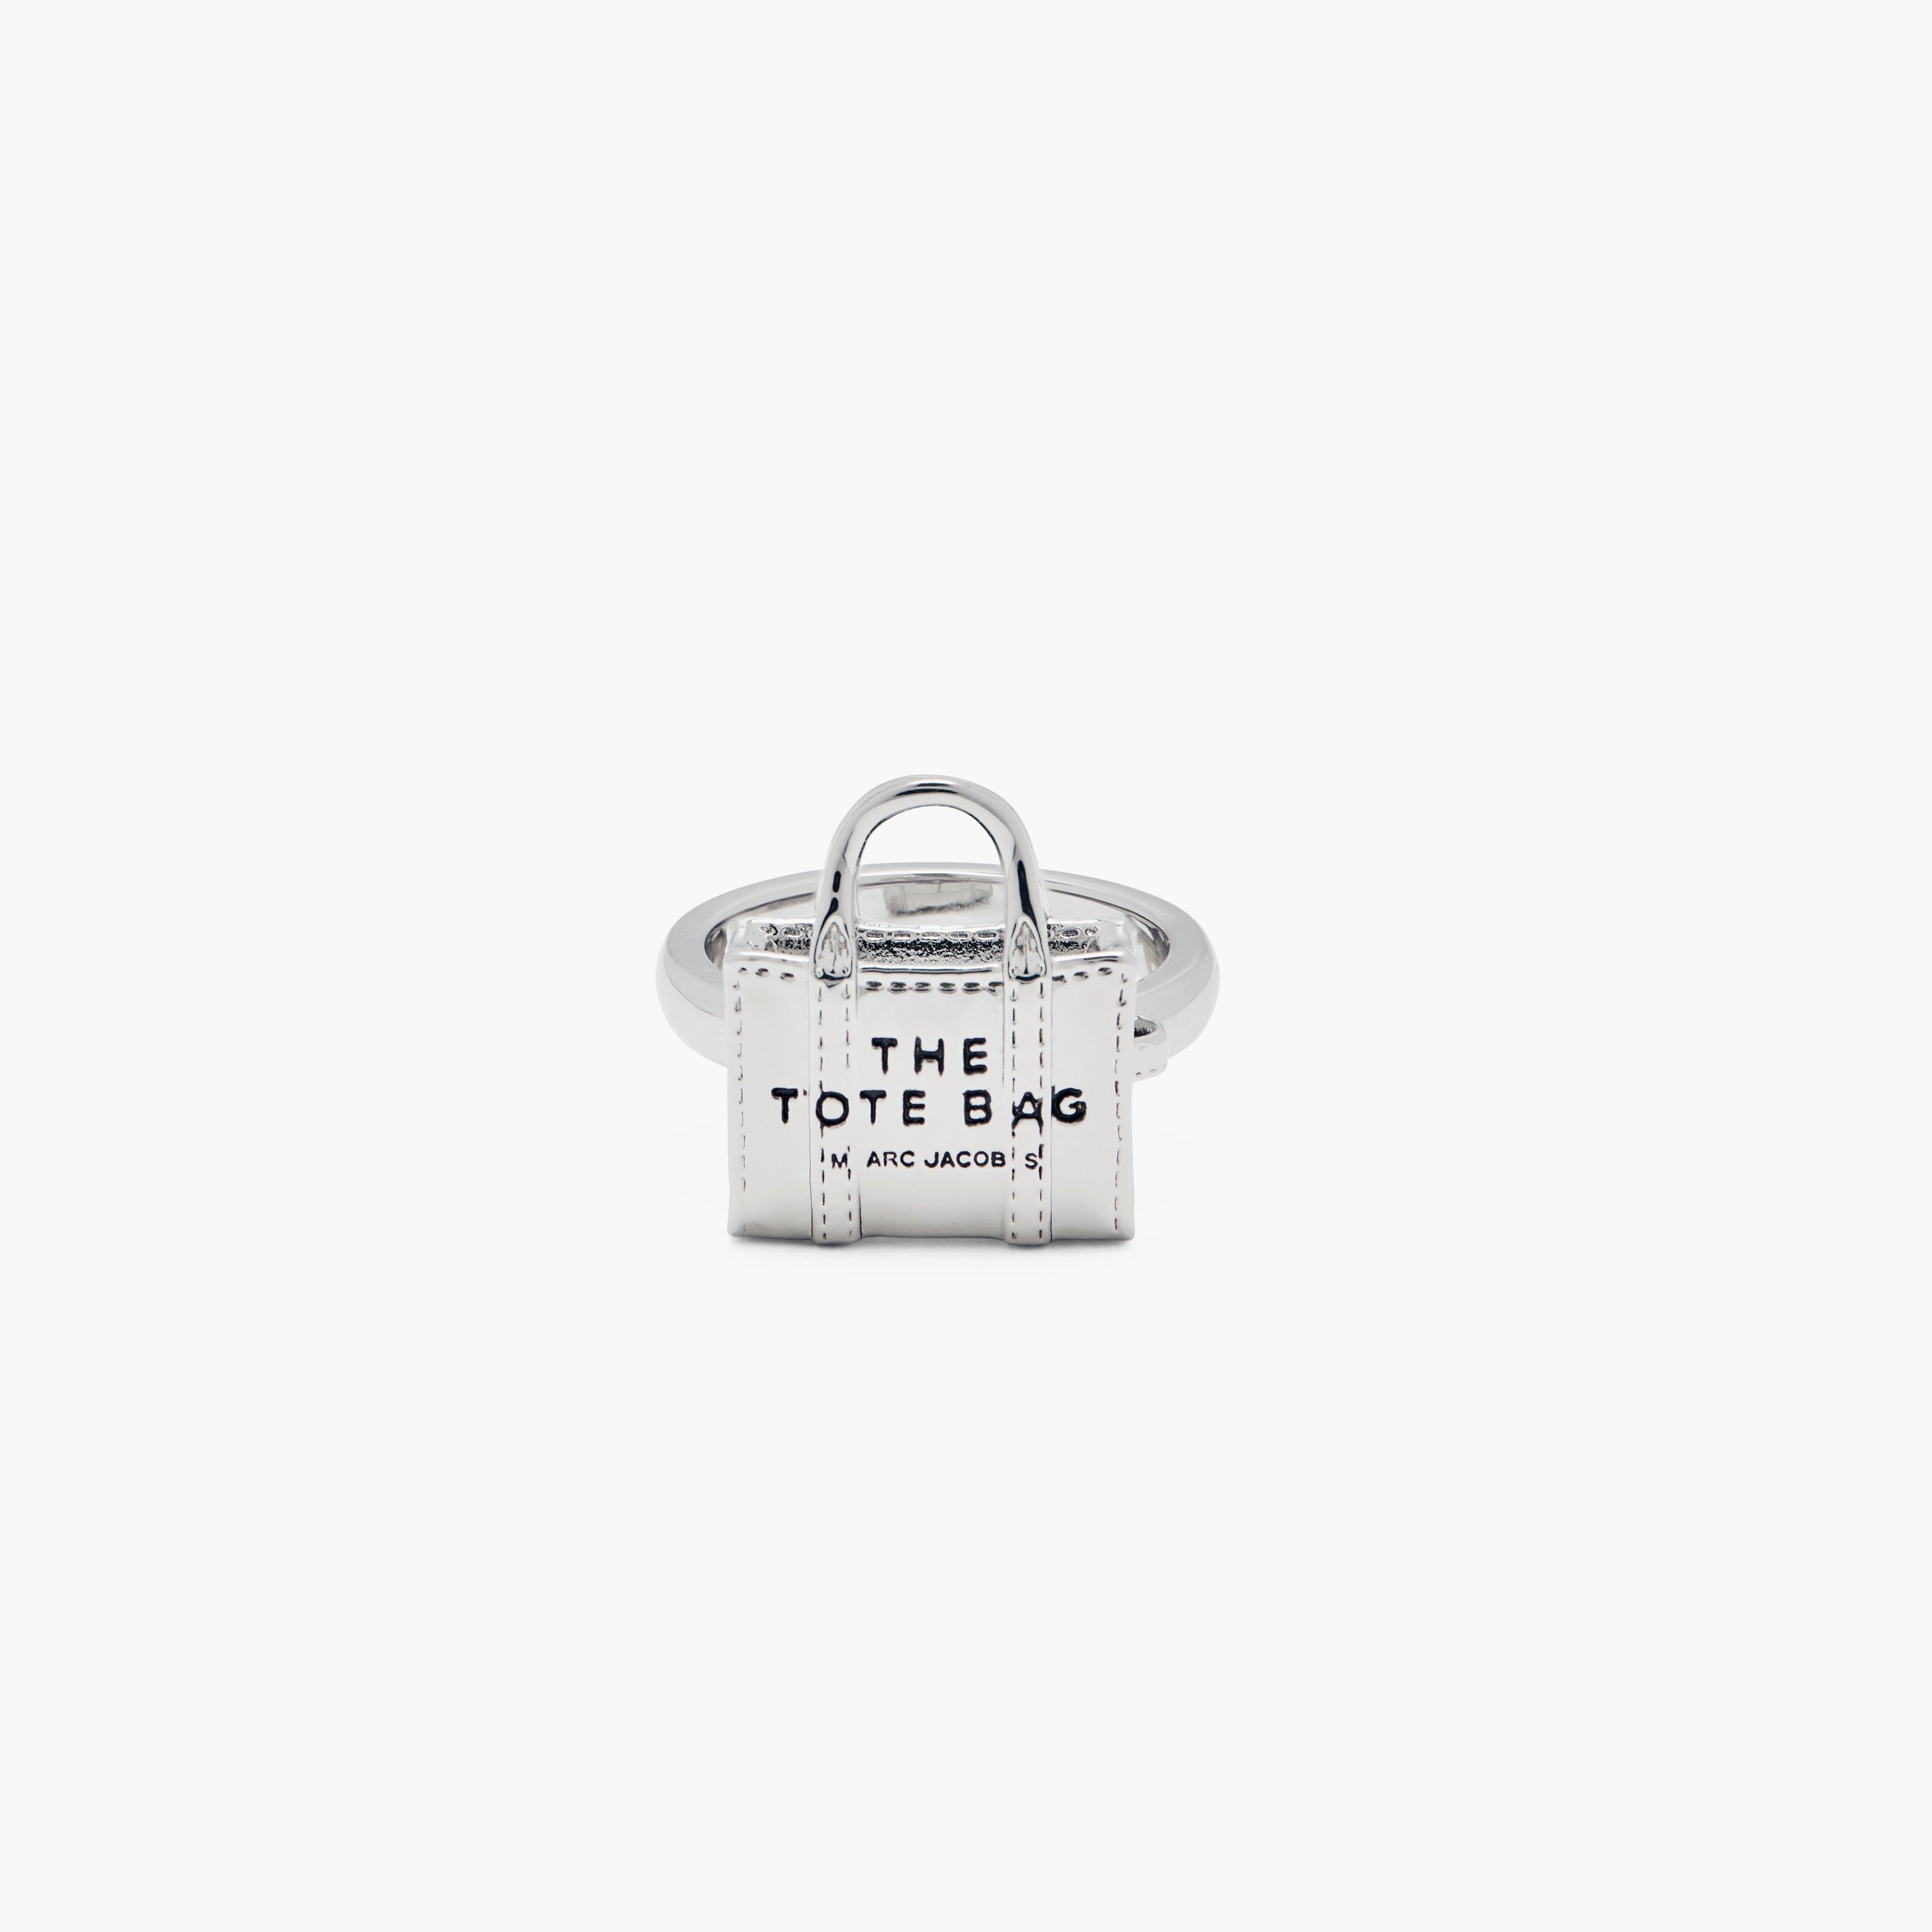 Marc by Marc jacobs The Tote Bag Ring,LIGHT ANTIQUE SILVER